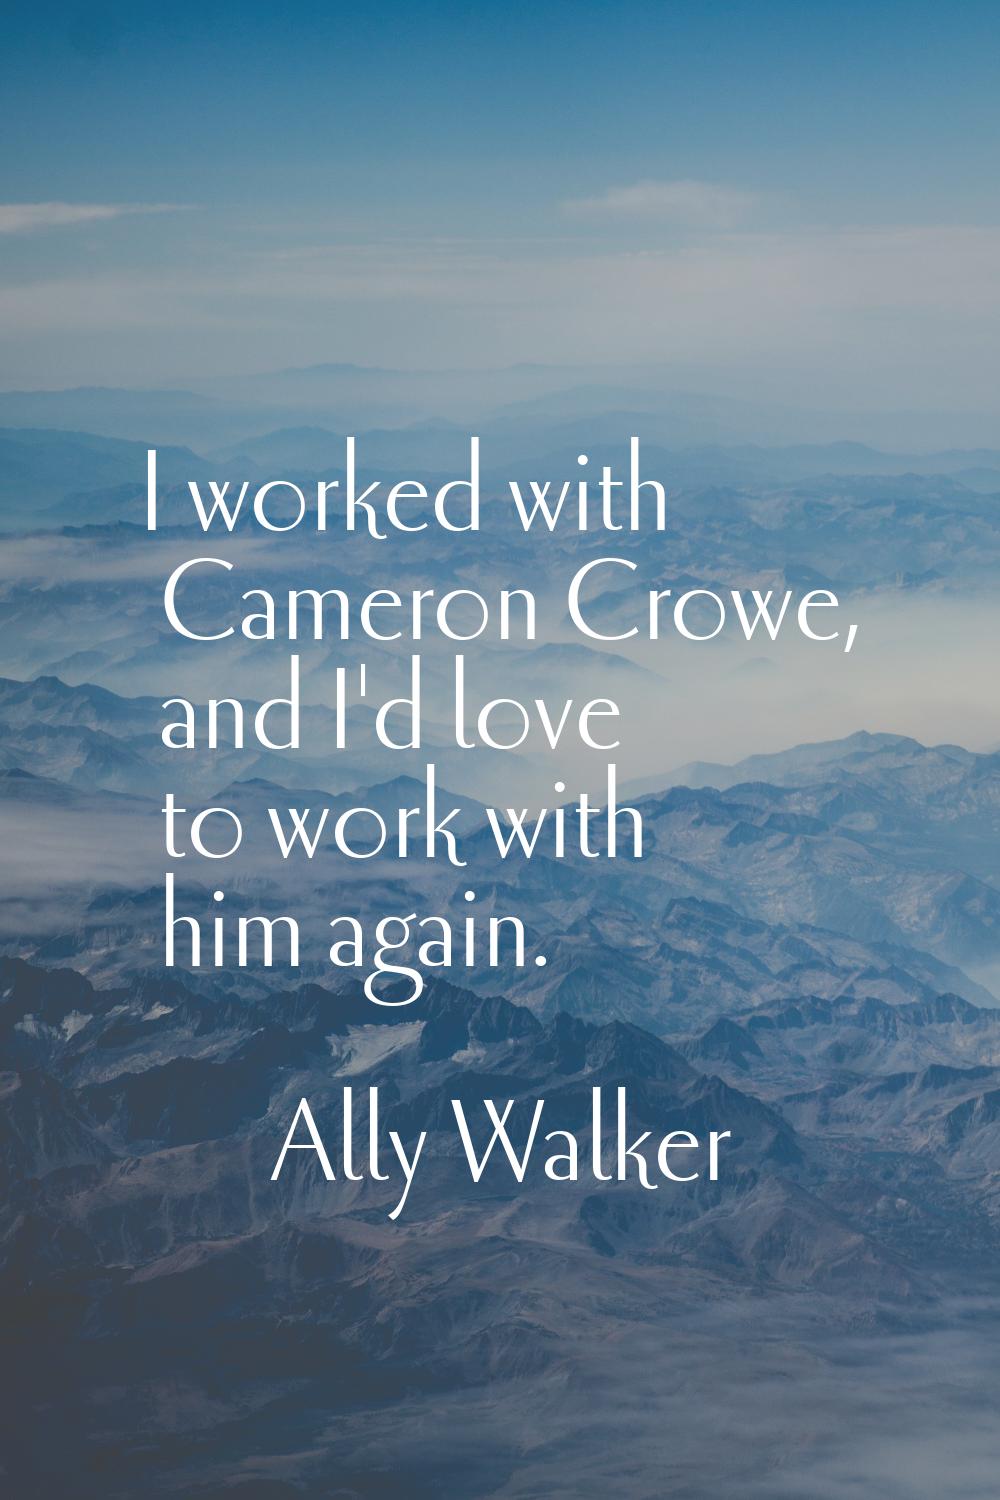 I worked with Cameron Crowe, and I'd love to work with him again.